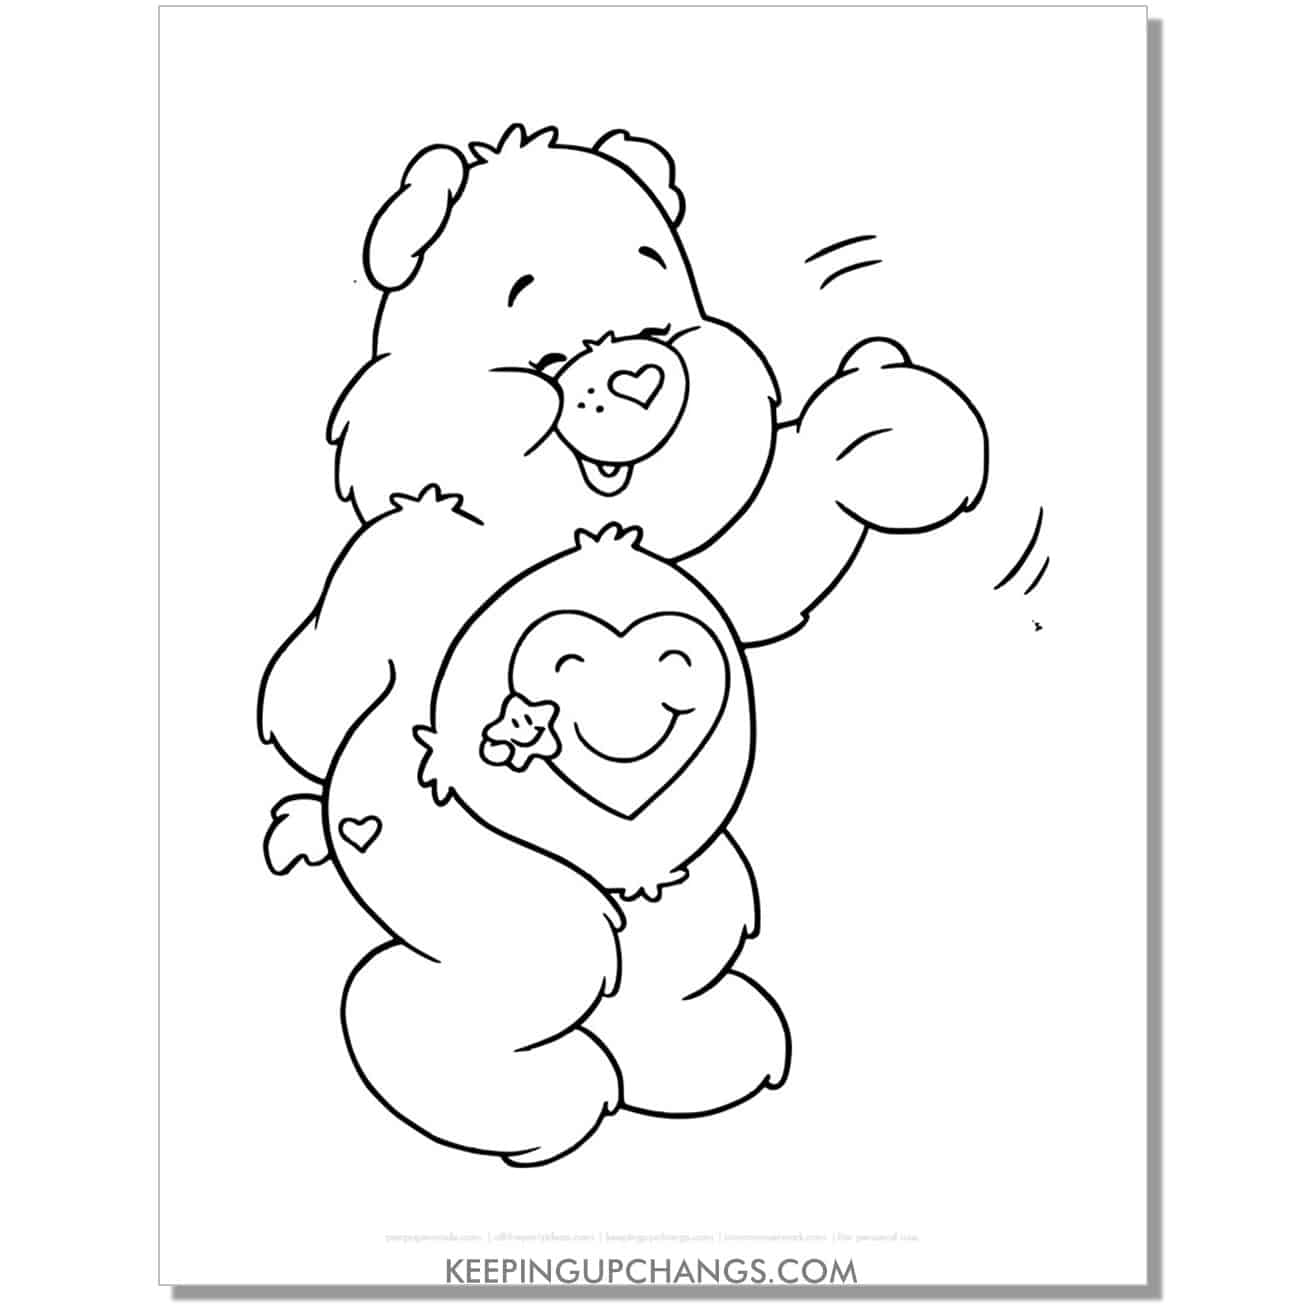 happy take care bear care bear coloring page, sheet.